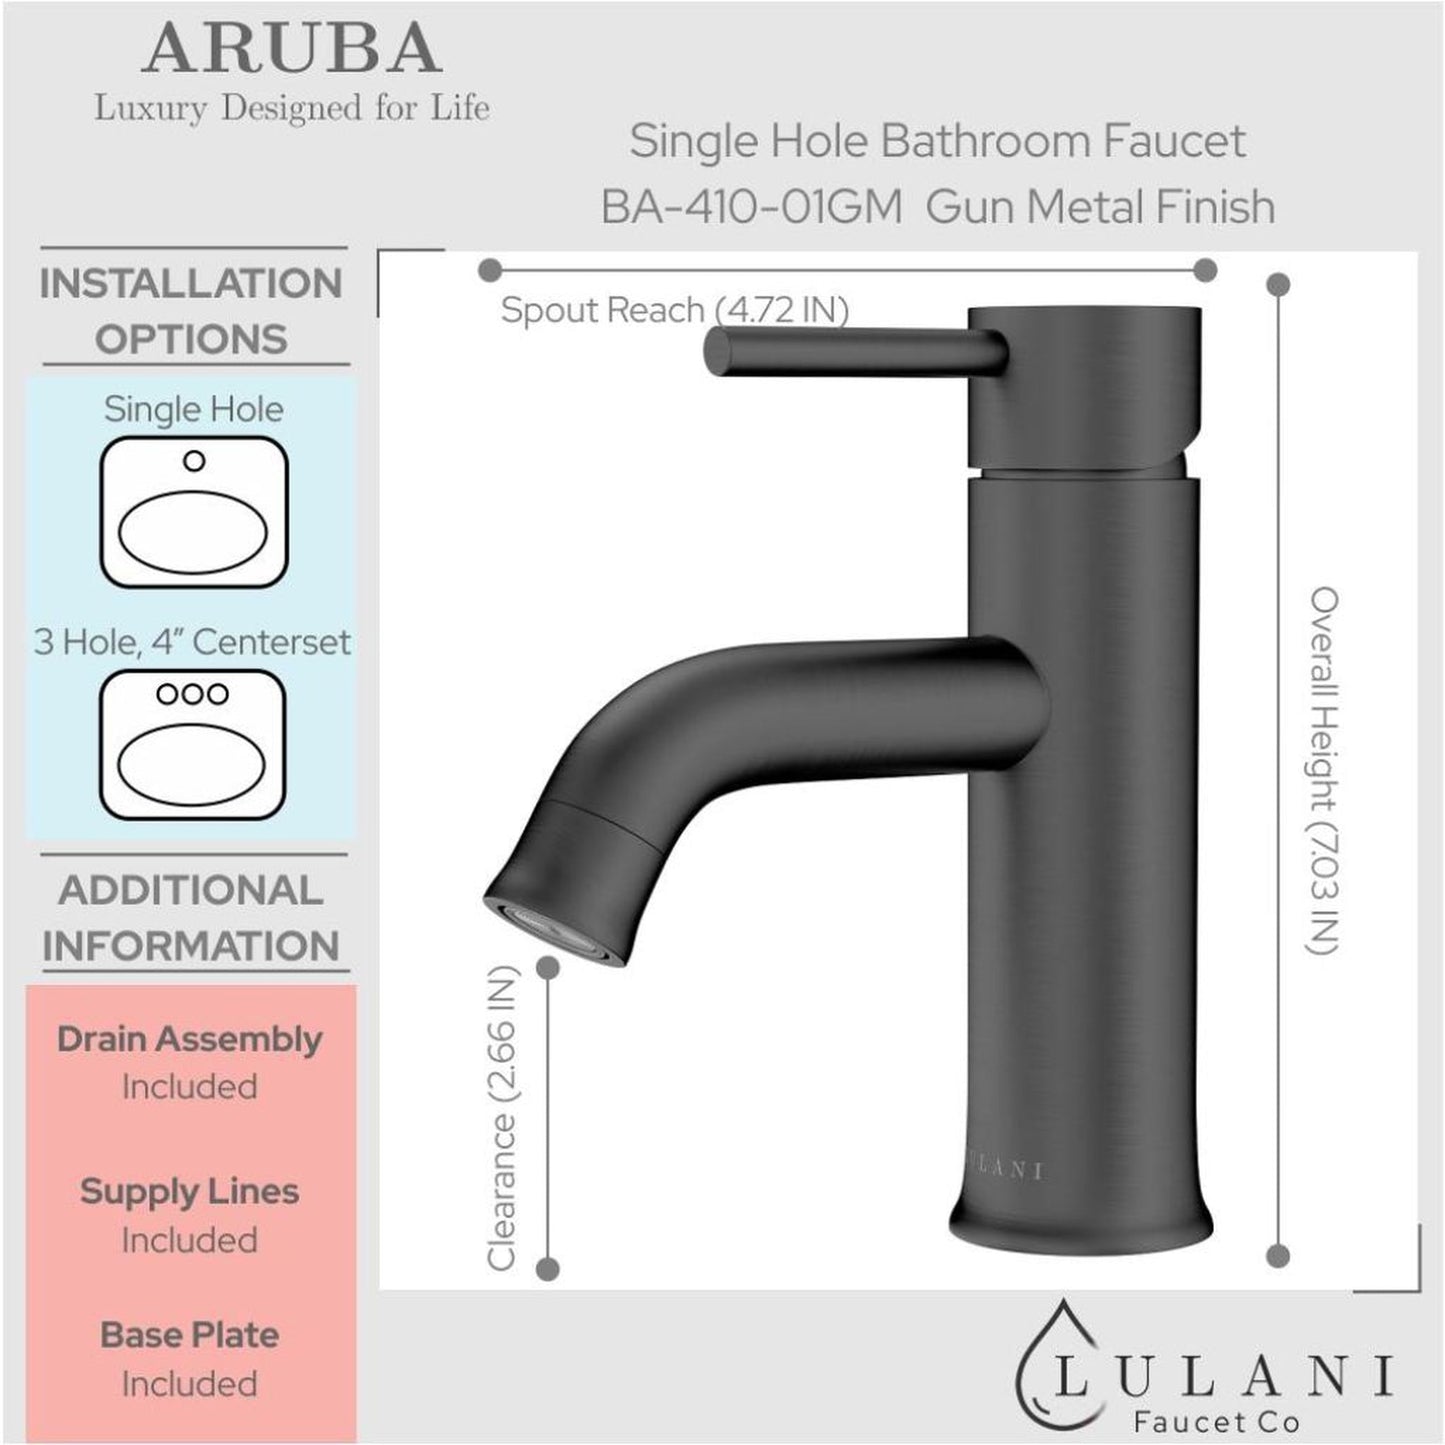 Lulani Aruba Gun Metal 1.2 GPM Stainless Steel Construction Single Hole Faucet With Drain Assembly